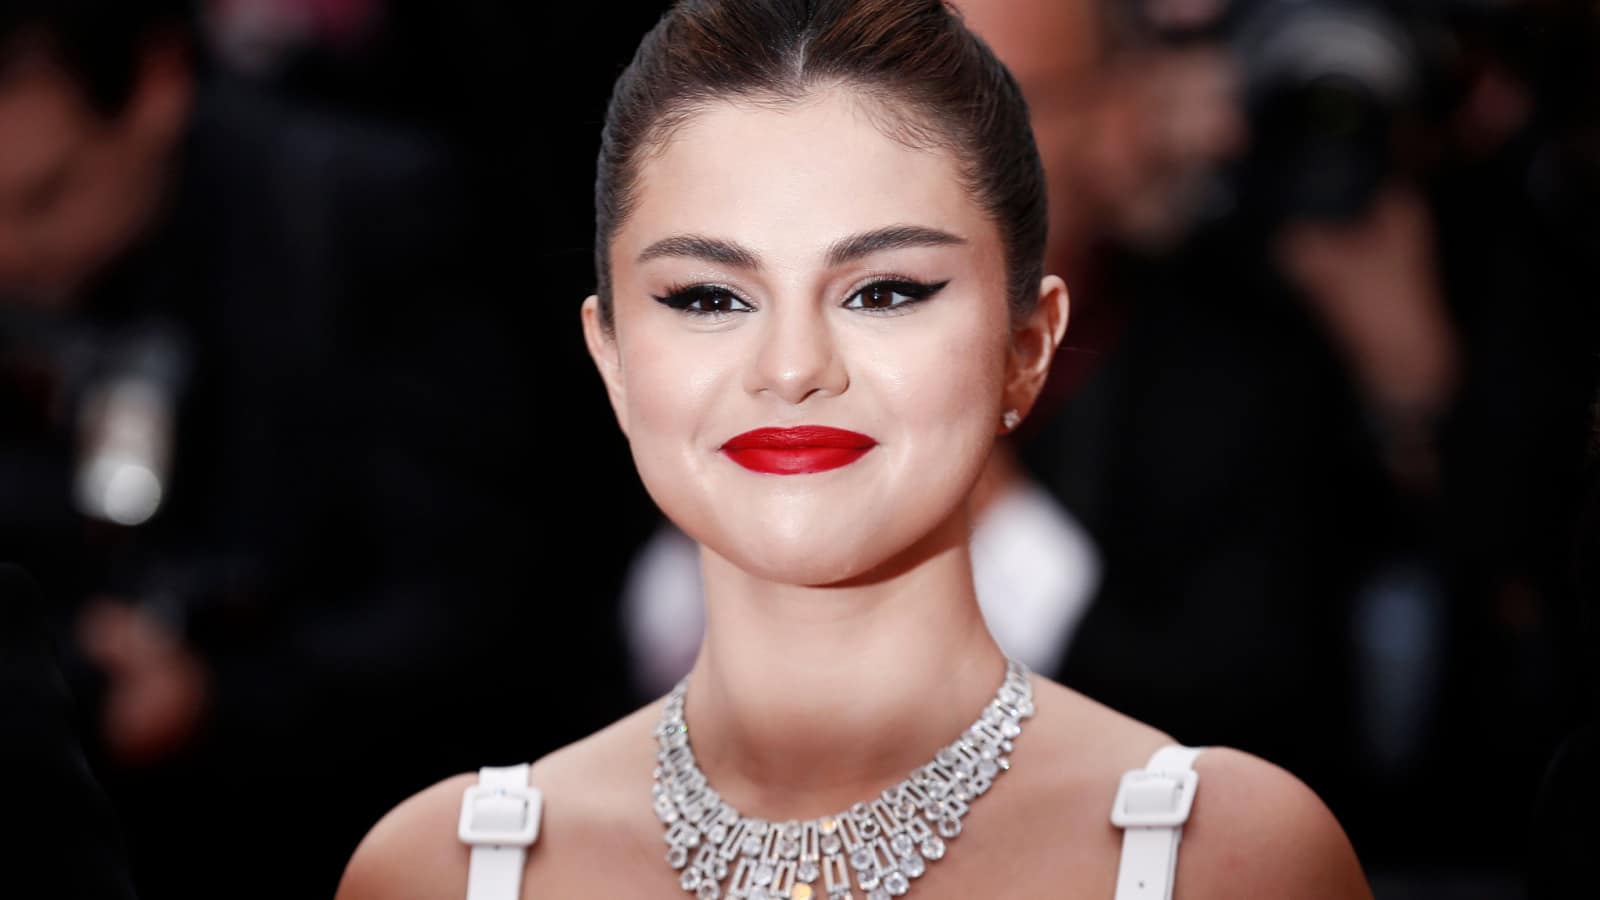 CANNES, FRANCE - MAY 14: Selena Gomez attends the opening ceremony during the 72nd Cannes Film Festival on May 14, 2019 in Cannes, France.